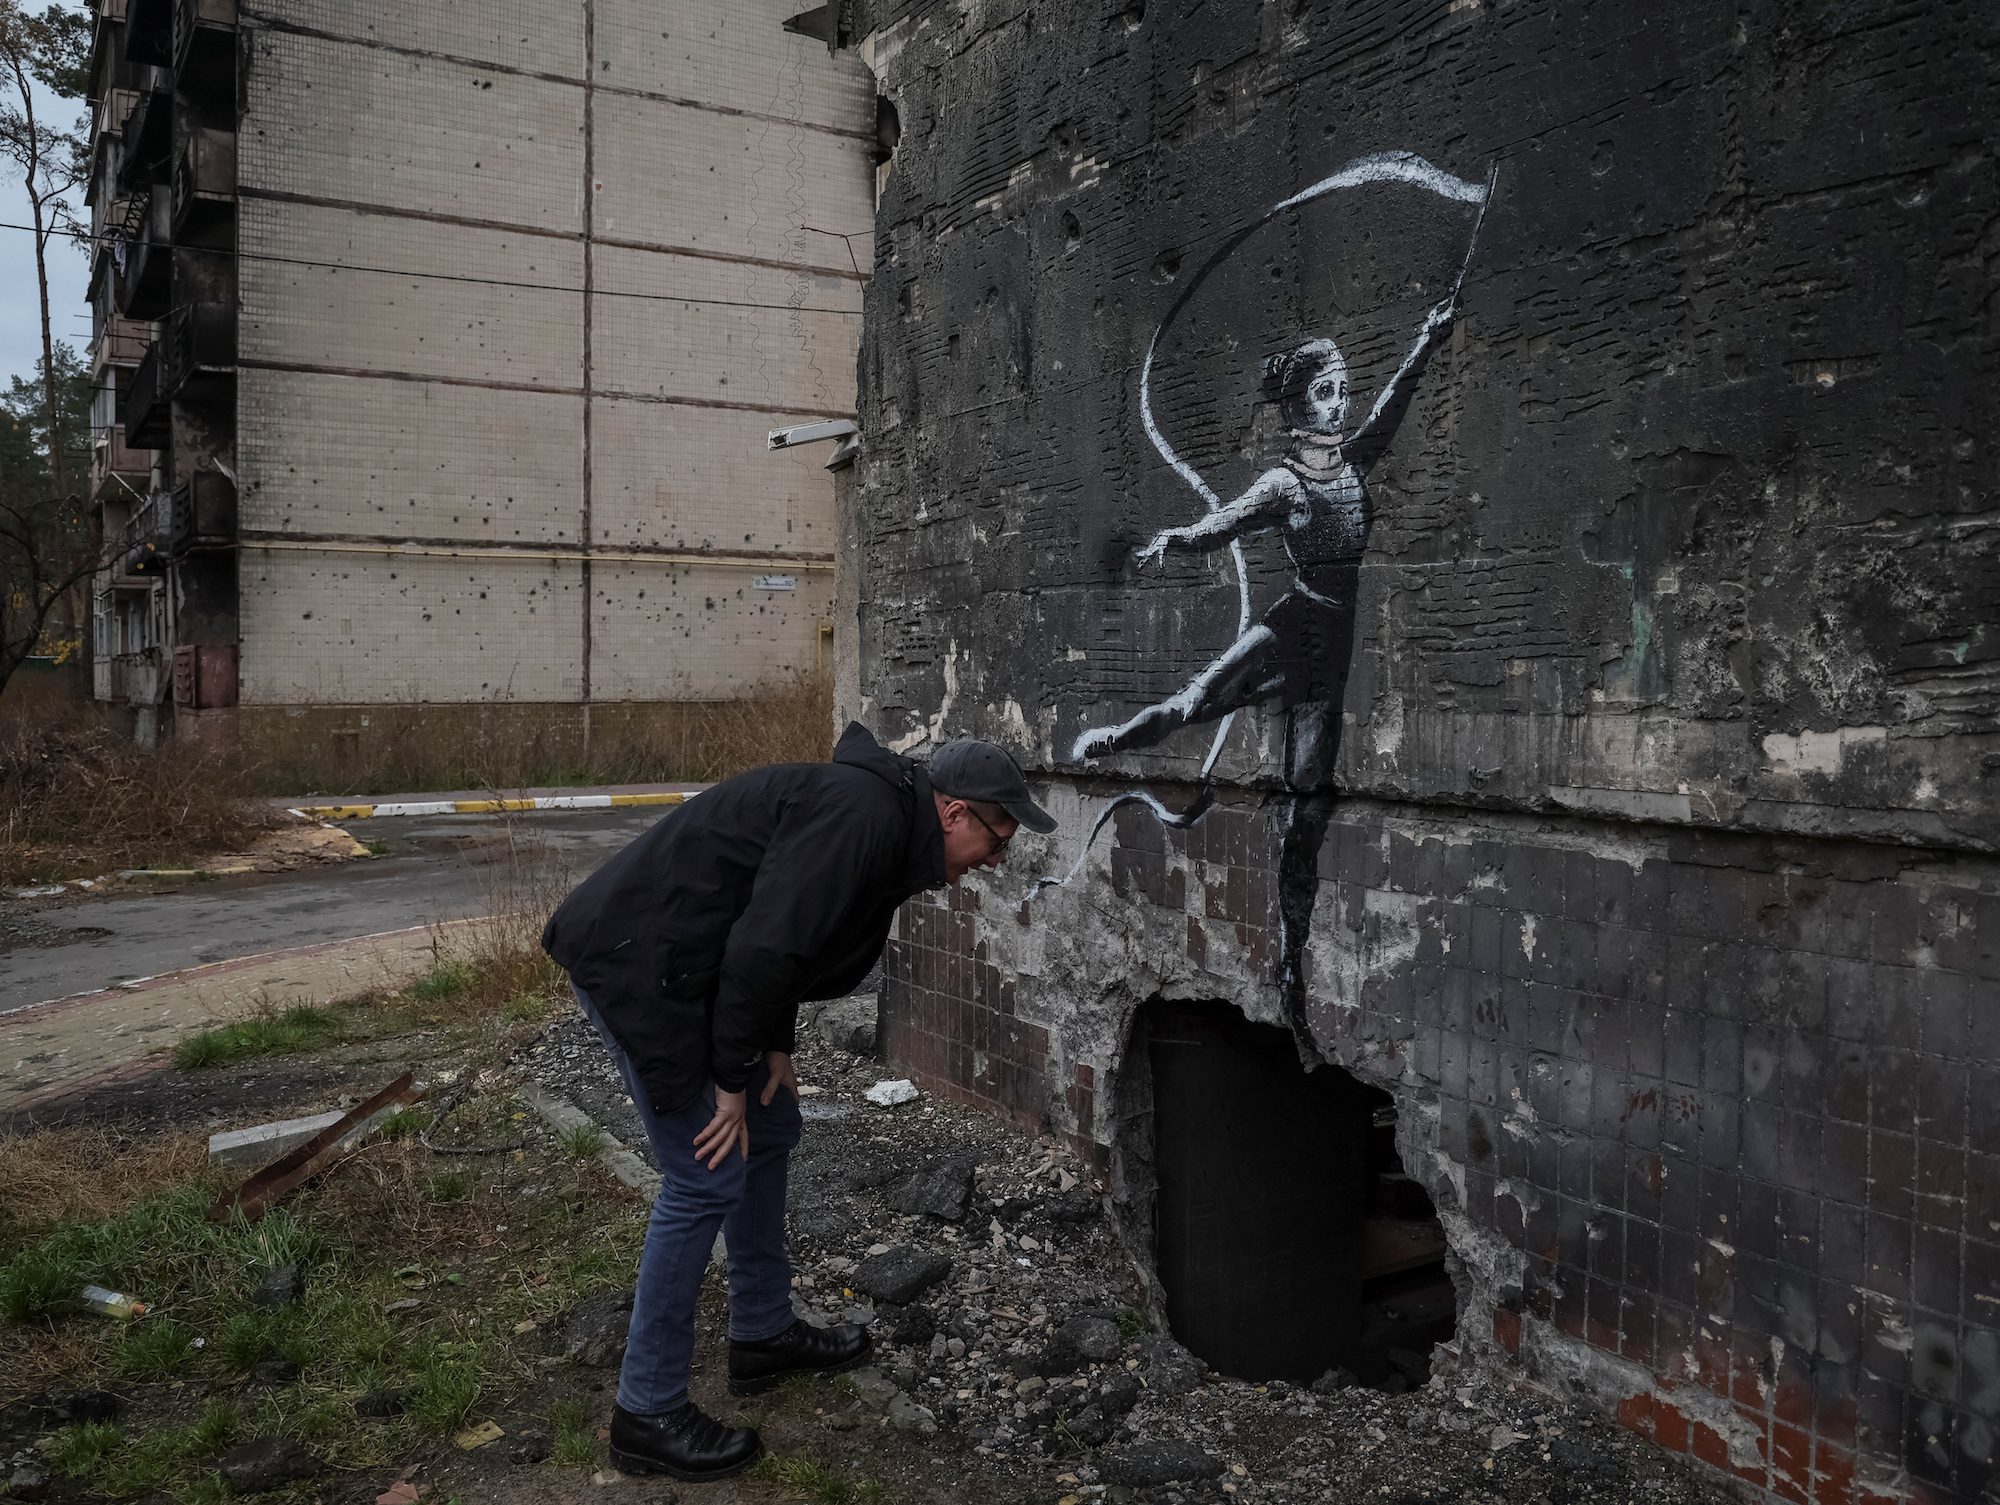 A new graffiti in Banksy's signature style, although not posted by the mercurial artist on social media, is seen at the wall of destroyed building in the Ukrainian town of Irpin, which heavily damaged by fighting in the early month of Russian invasion, November 12, 2022.  REUTERS/Gleb Garanich